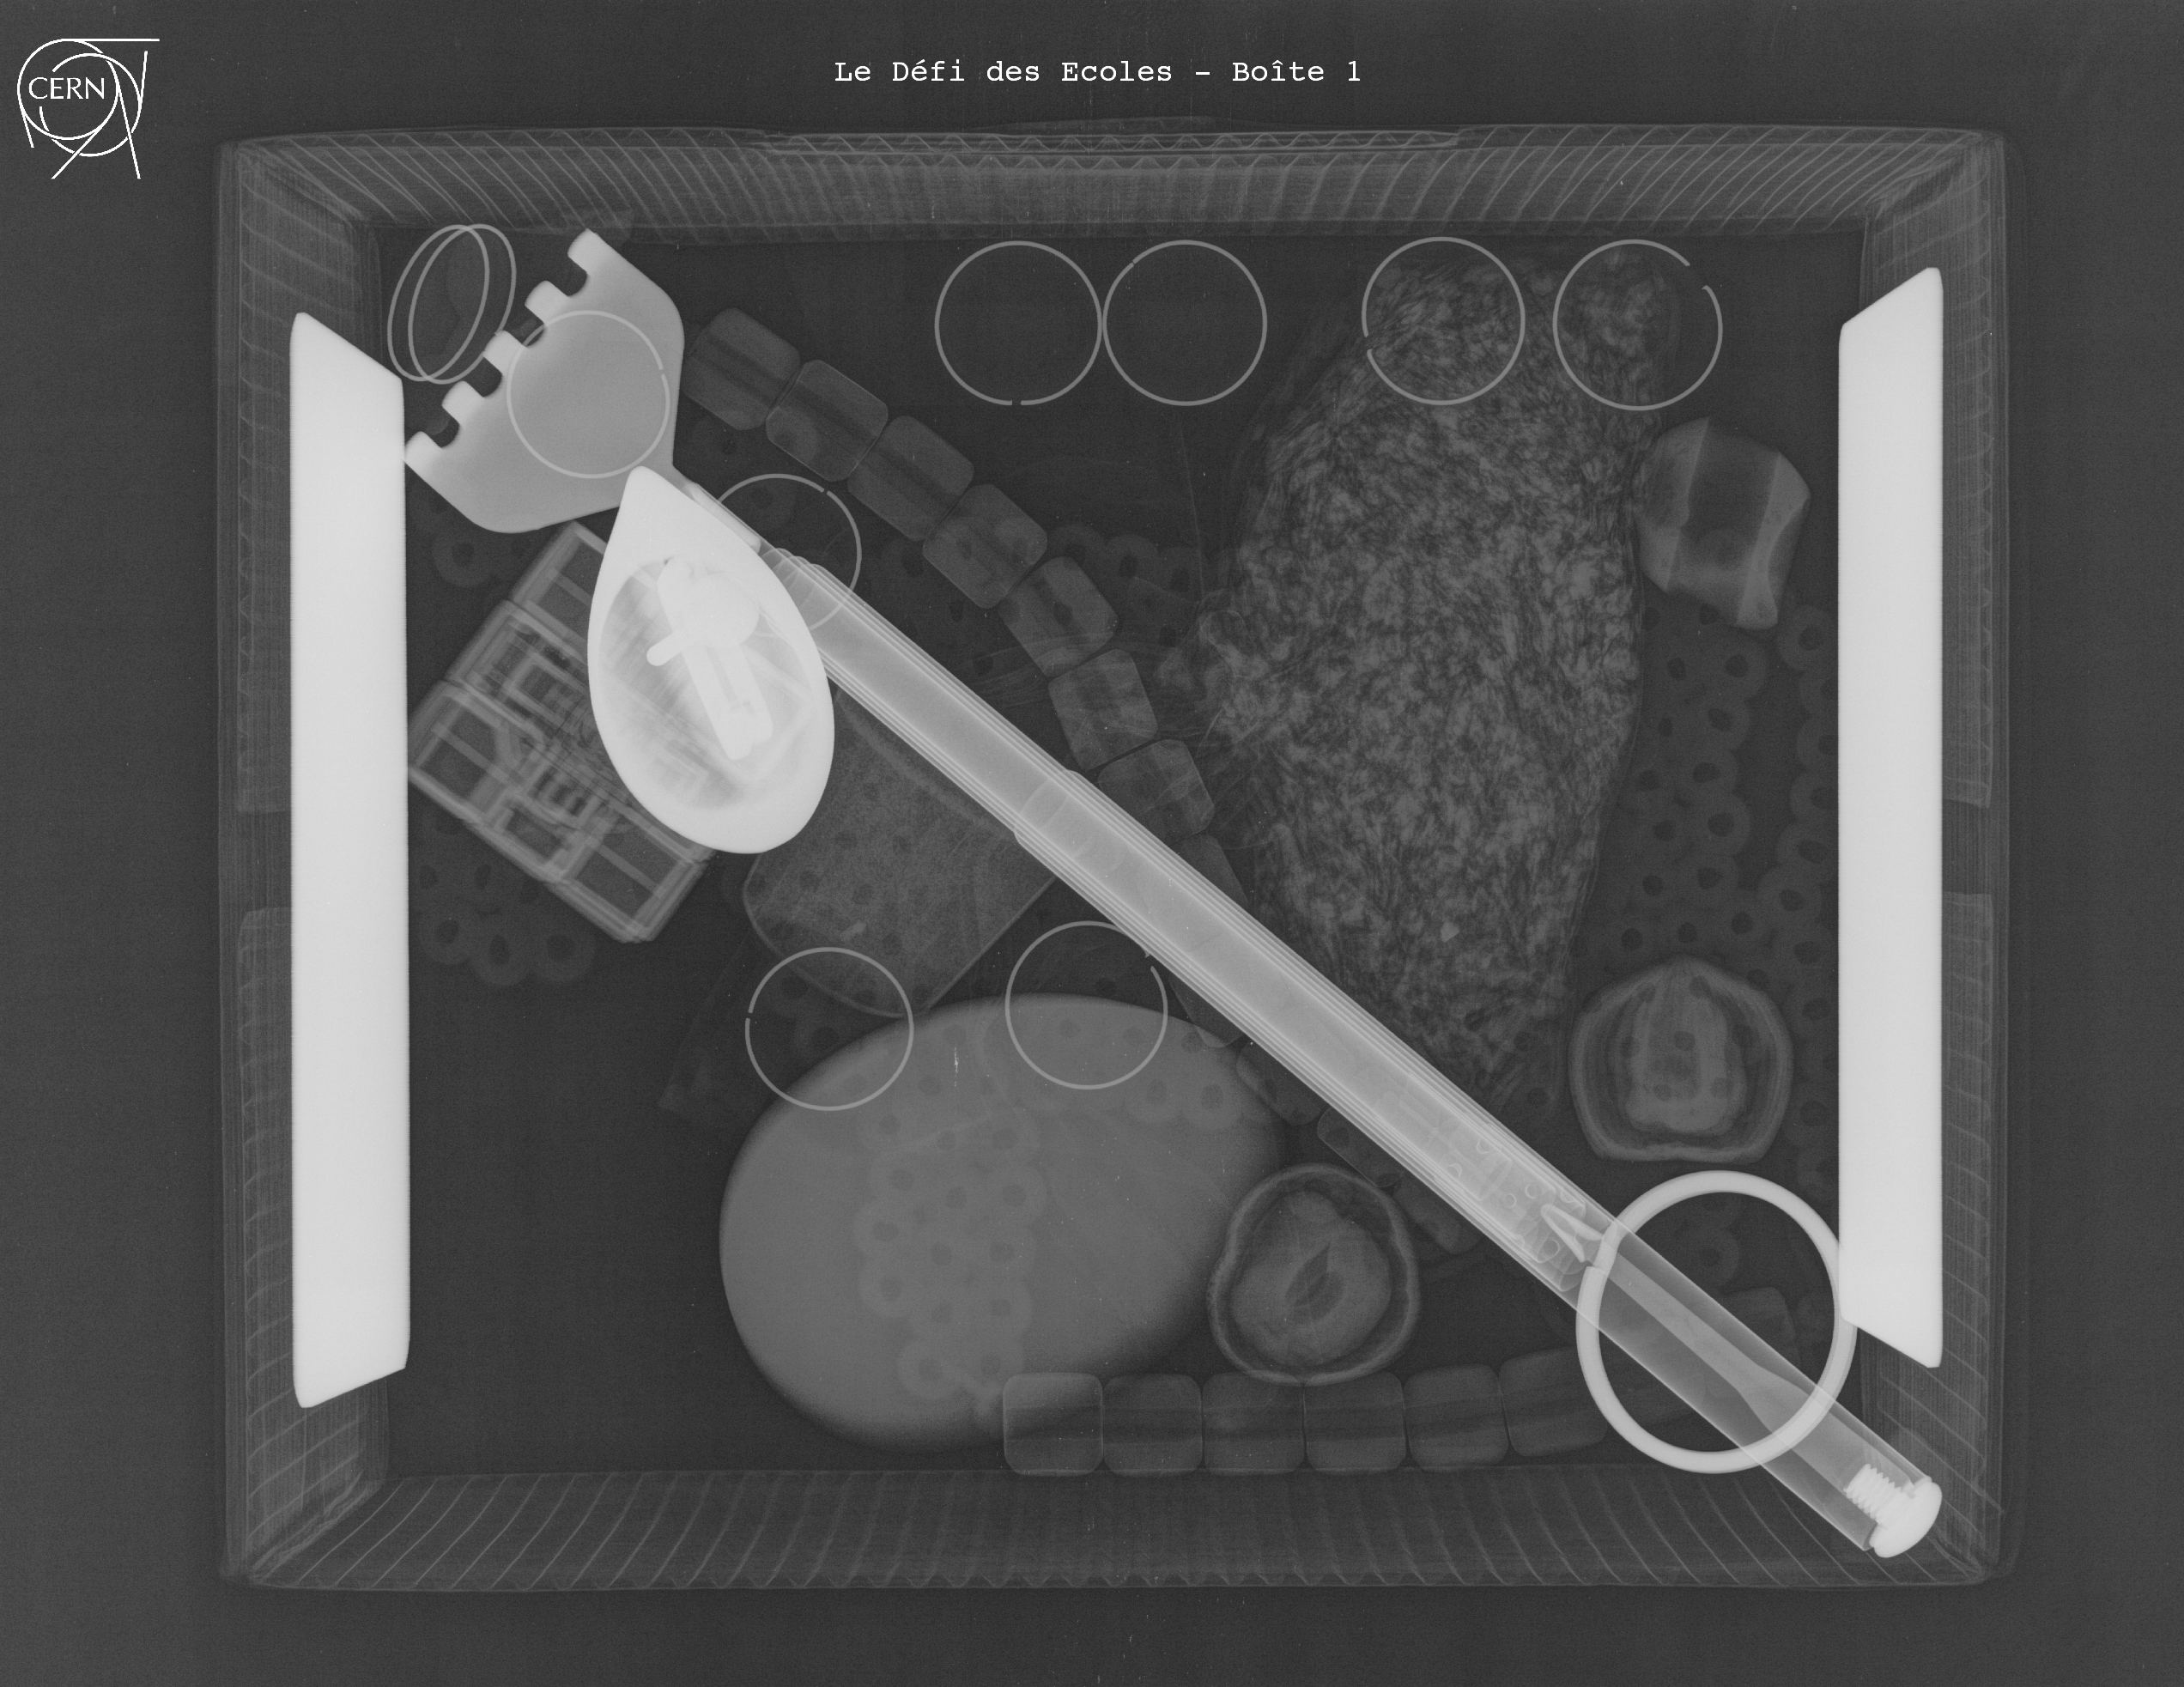 X-ray of the Swiss box